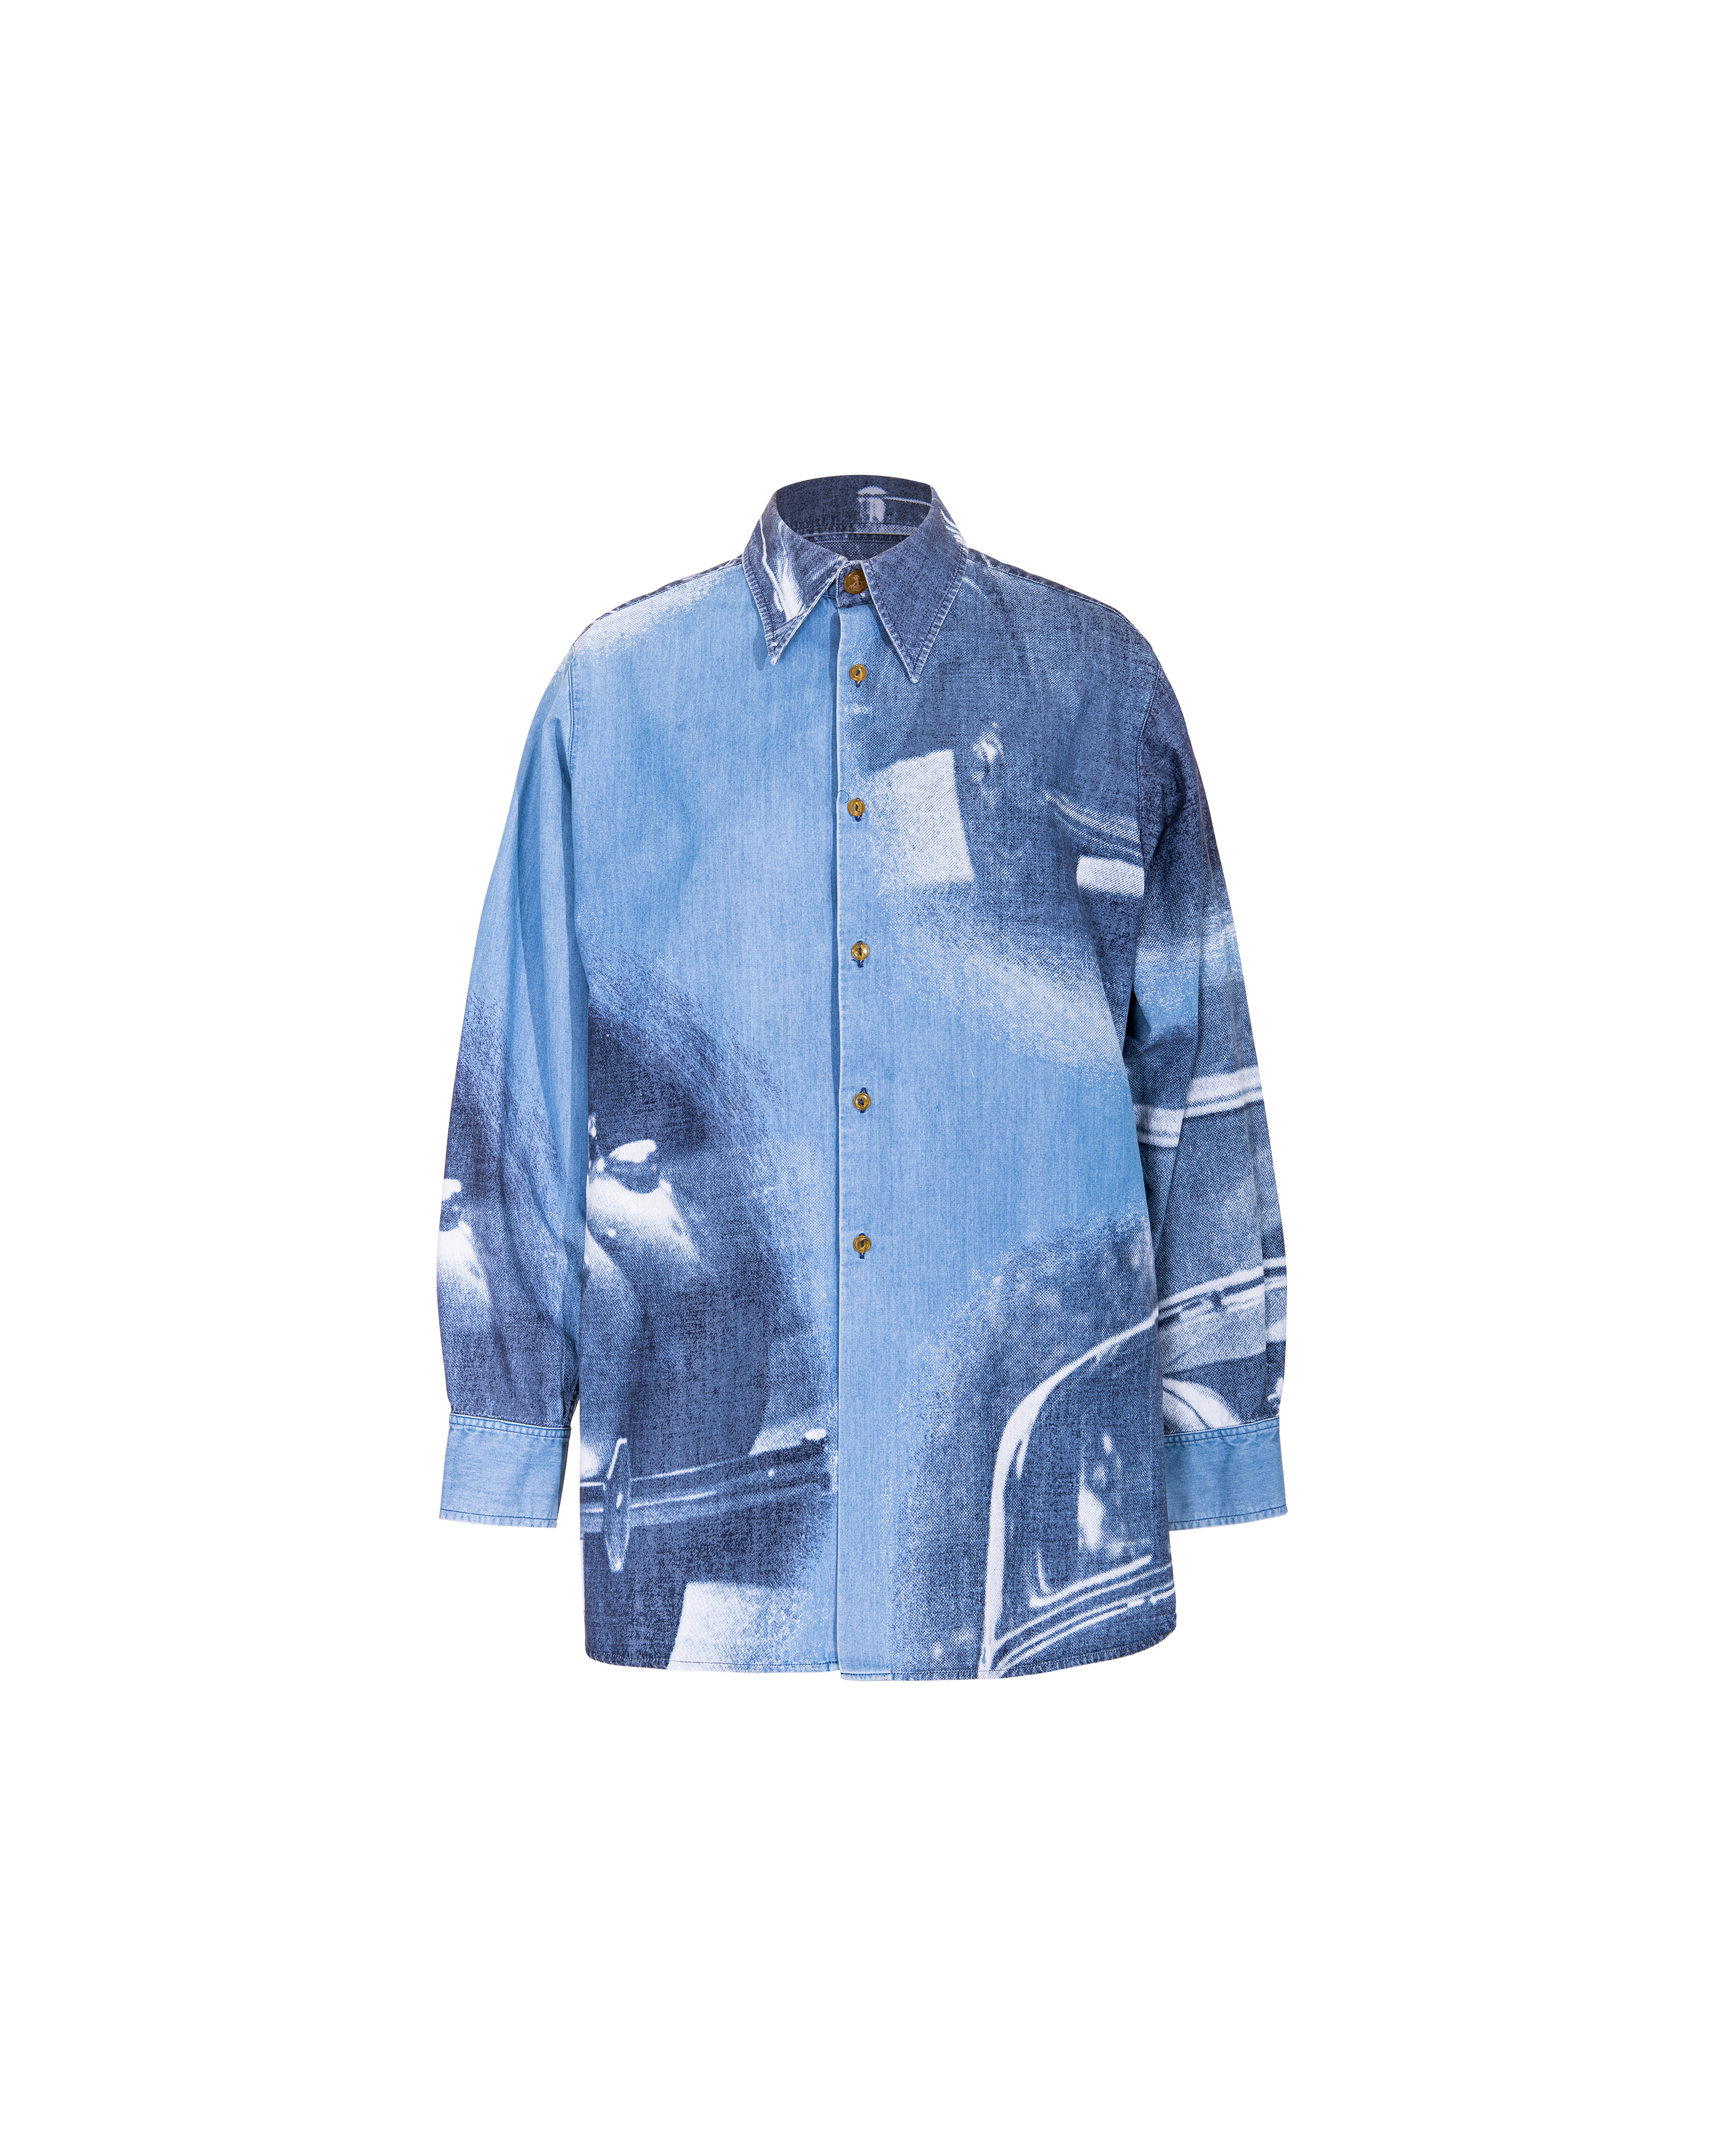 A/W 1992 'Always on Camera' Collection Rolls Royce Button-Up